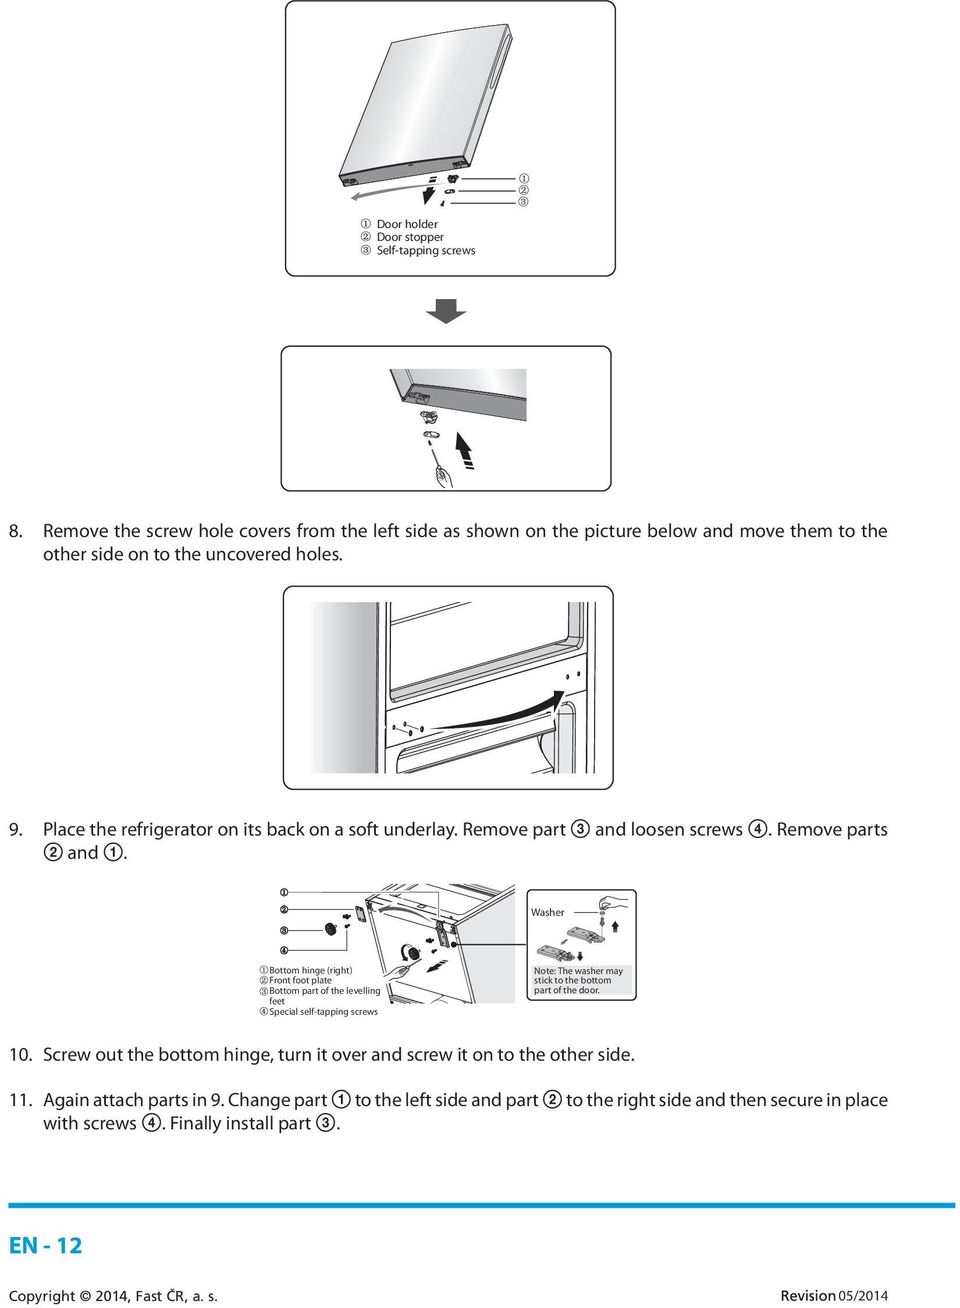 Place the refrigerator on its back on a soft underlay. Remove part 3 and loosen screws 4. Remove parts 2 and 1.